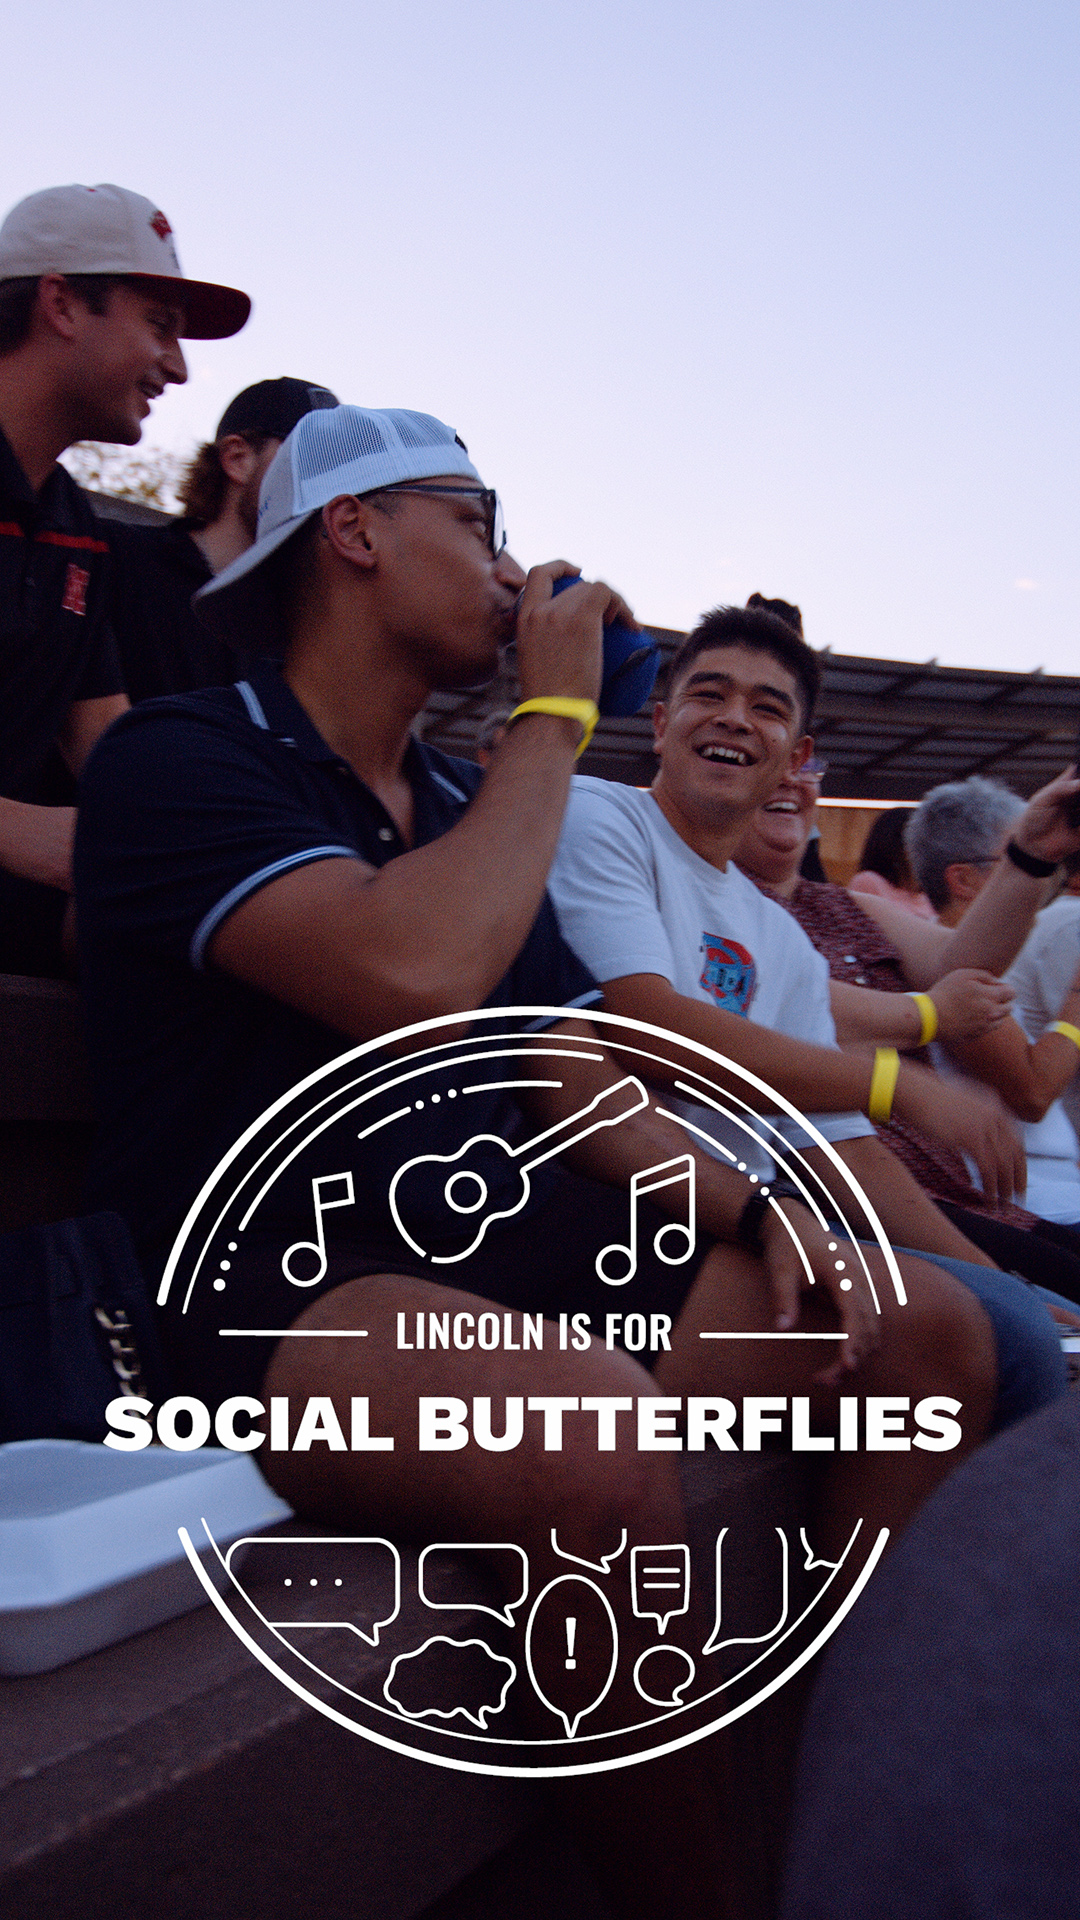 Lincoln is for Social Butterflies